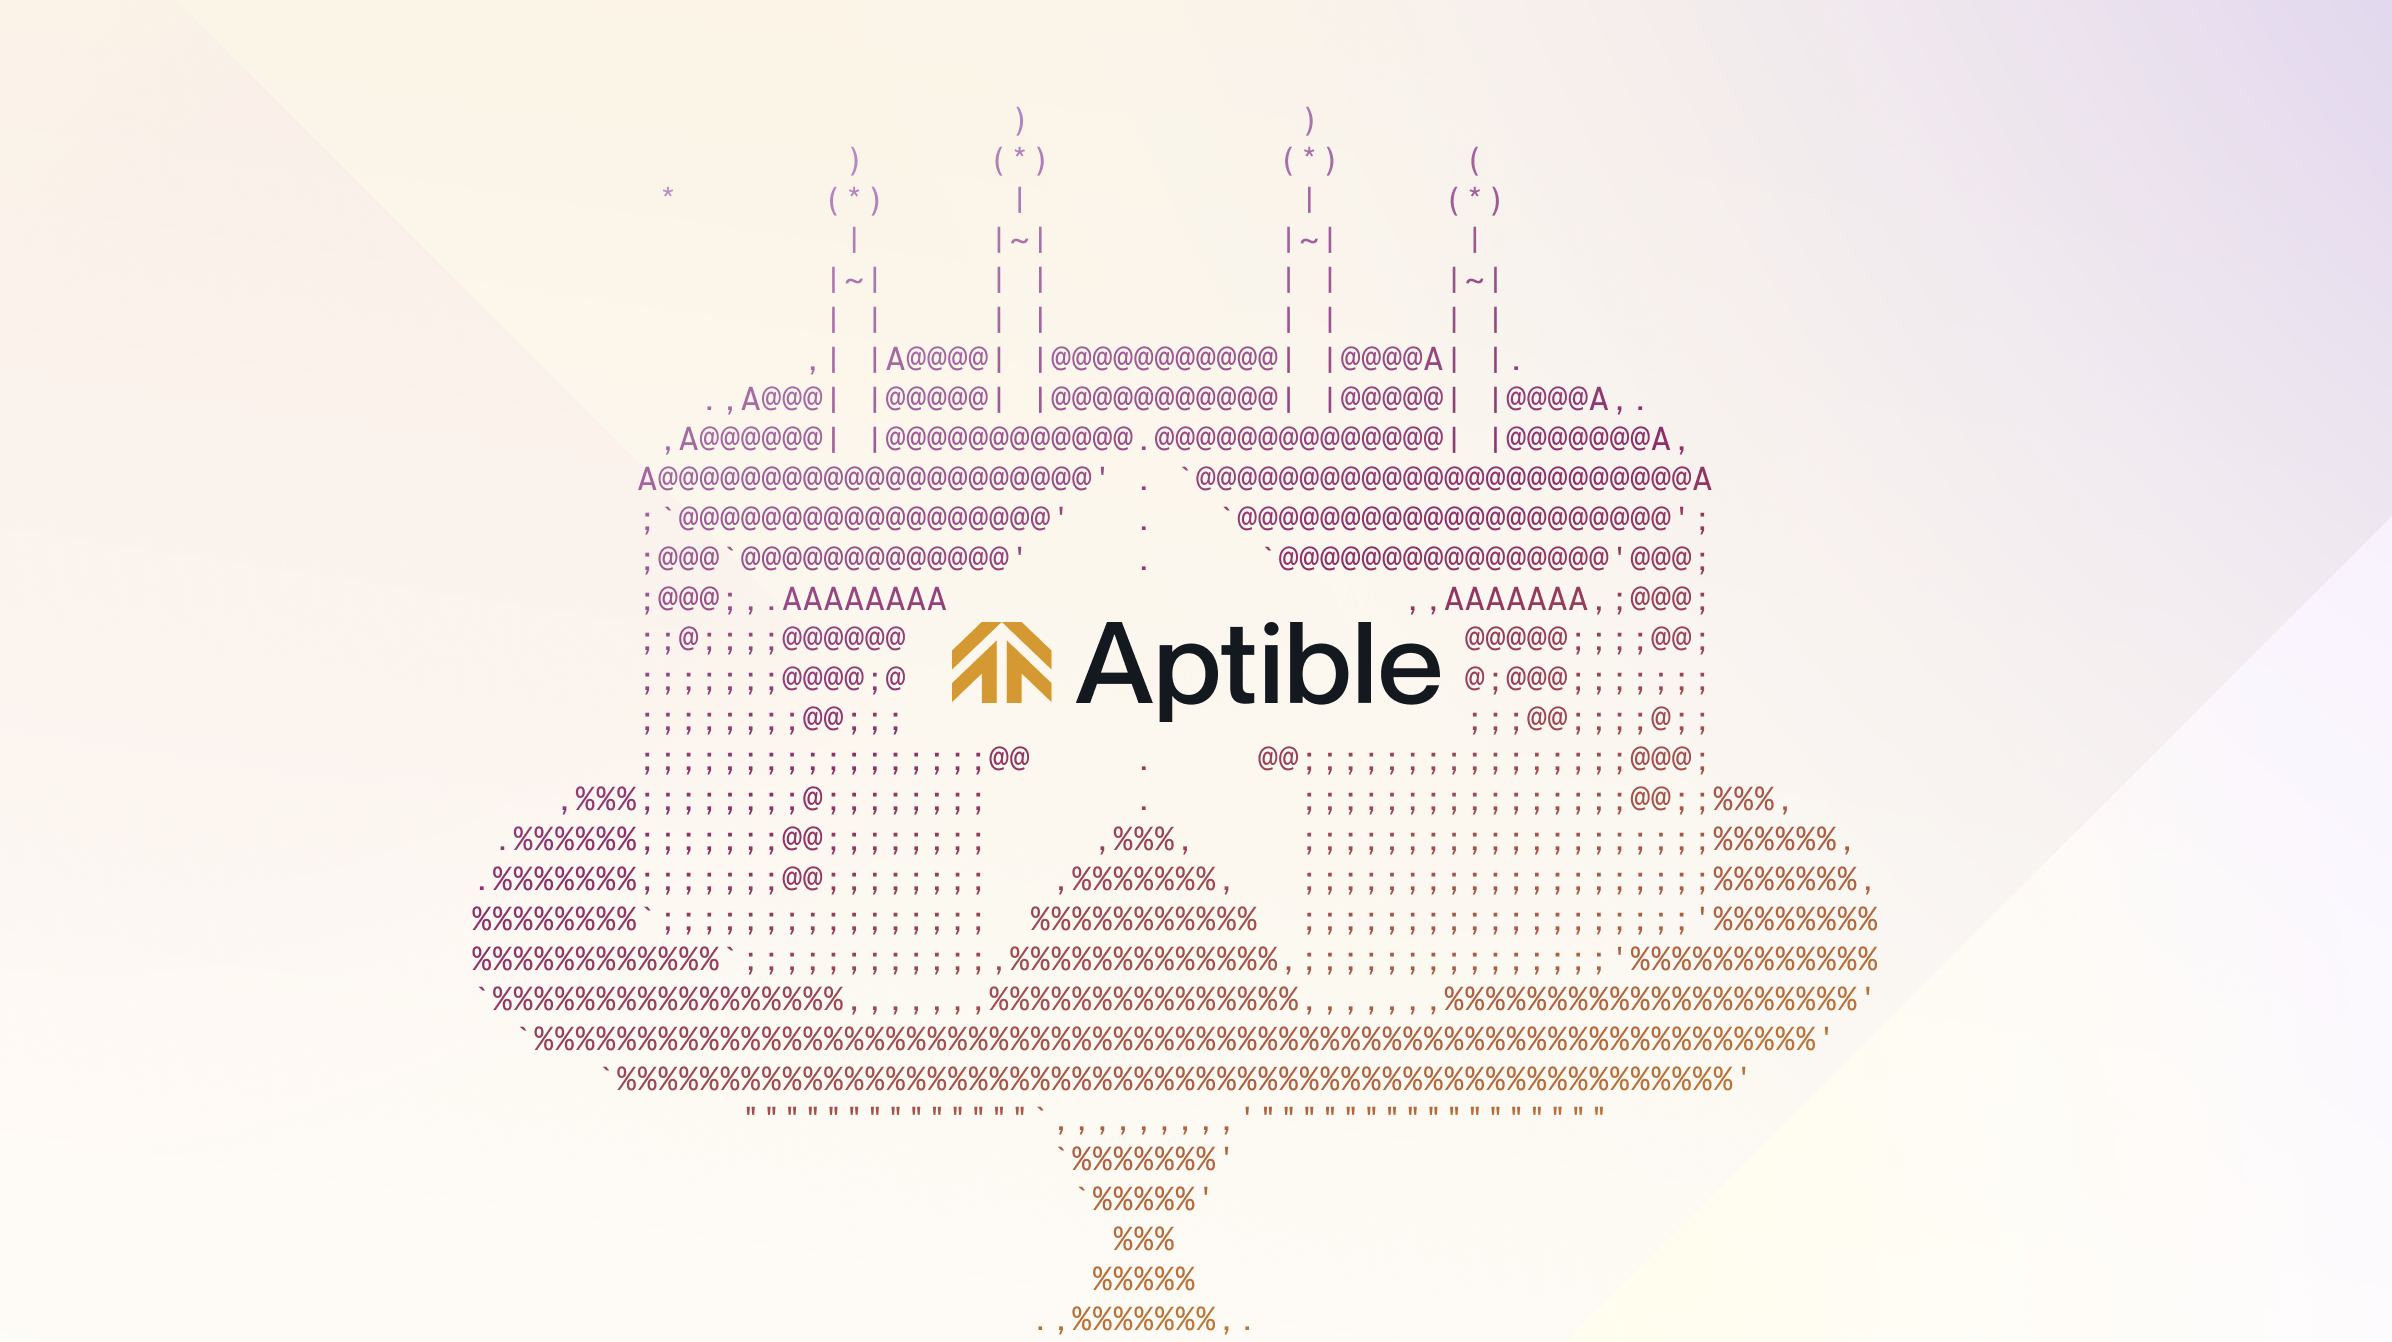 Aptible’s New Look, and the future of PaaS